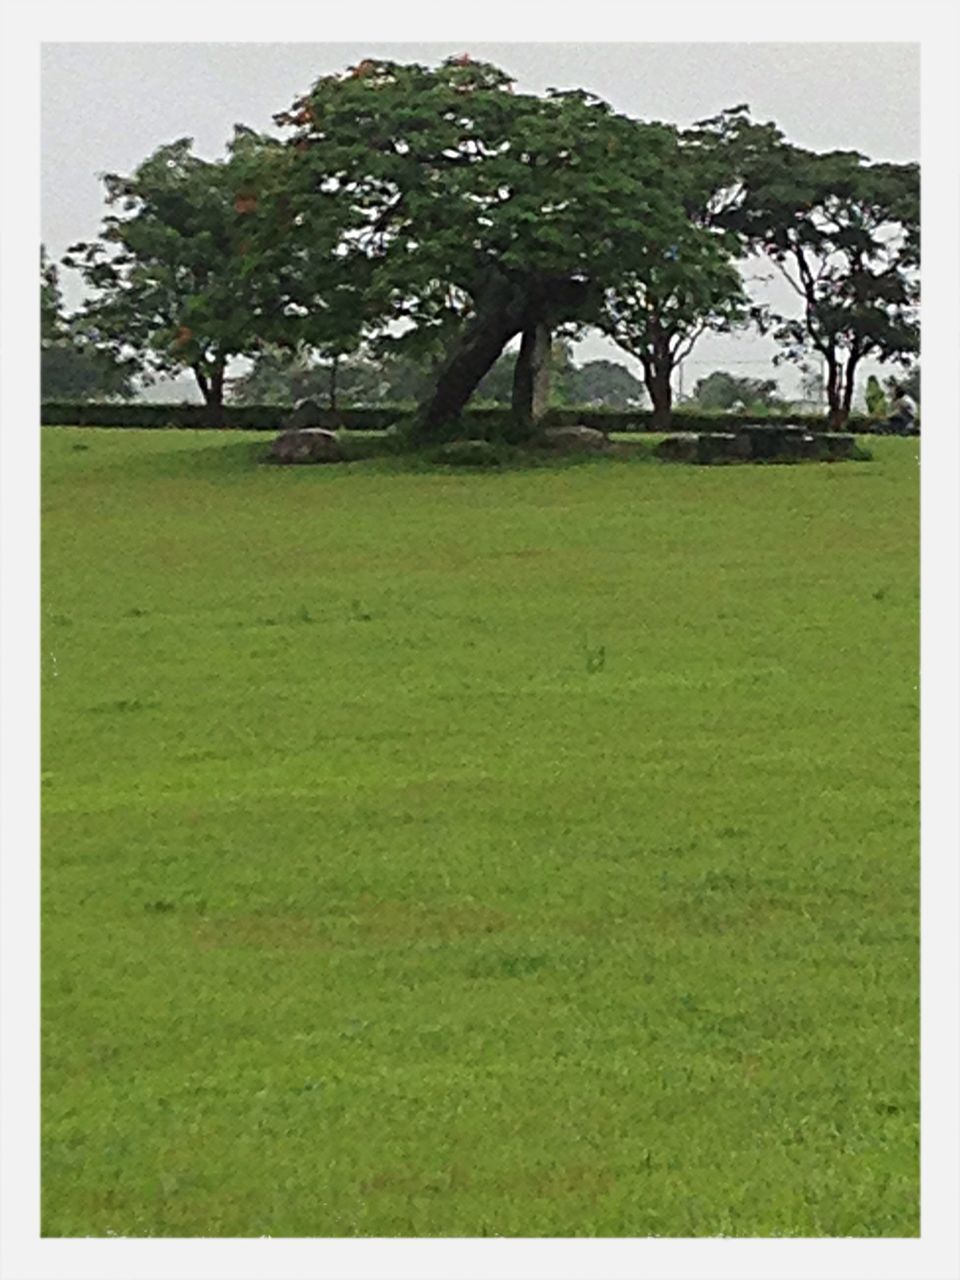 transfer print, grass, auto post production filter, tree, green color, field, growth, grassy, tranquility, landscape, nature, tranquil scene, lawn, beauty in nature, plant, day, built structure, house, park - man made space, outdoors